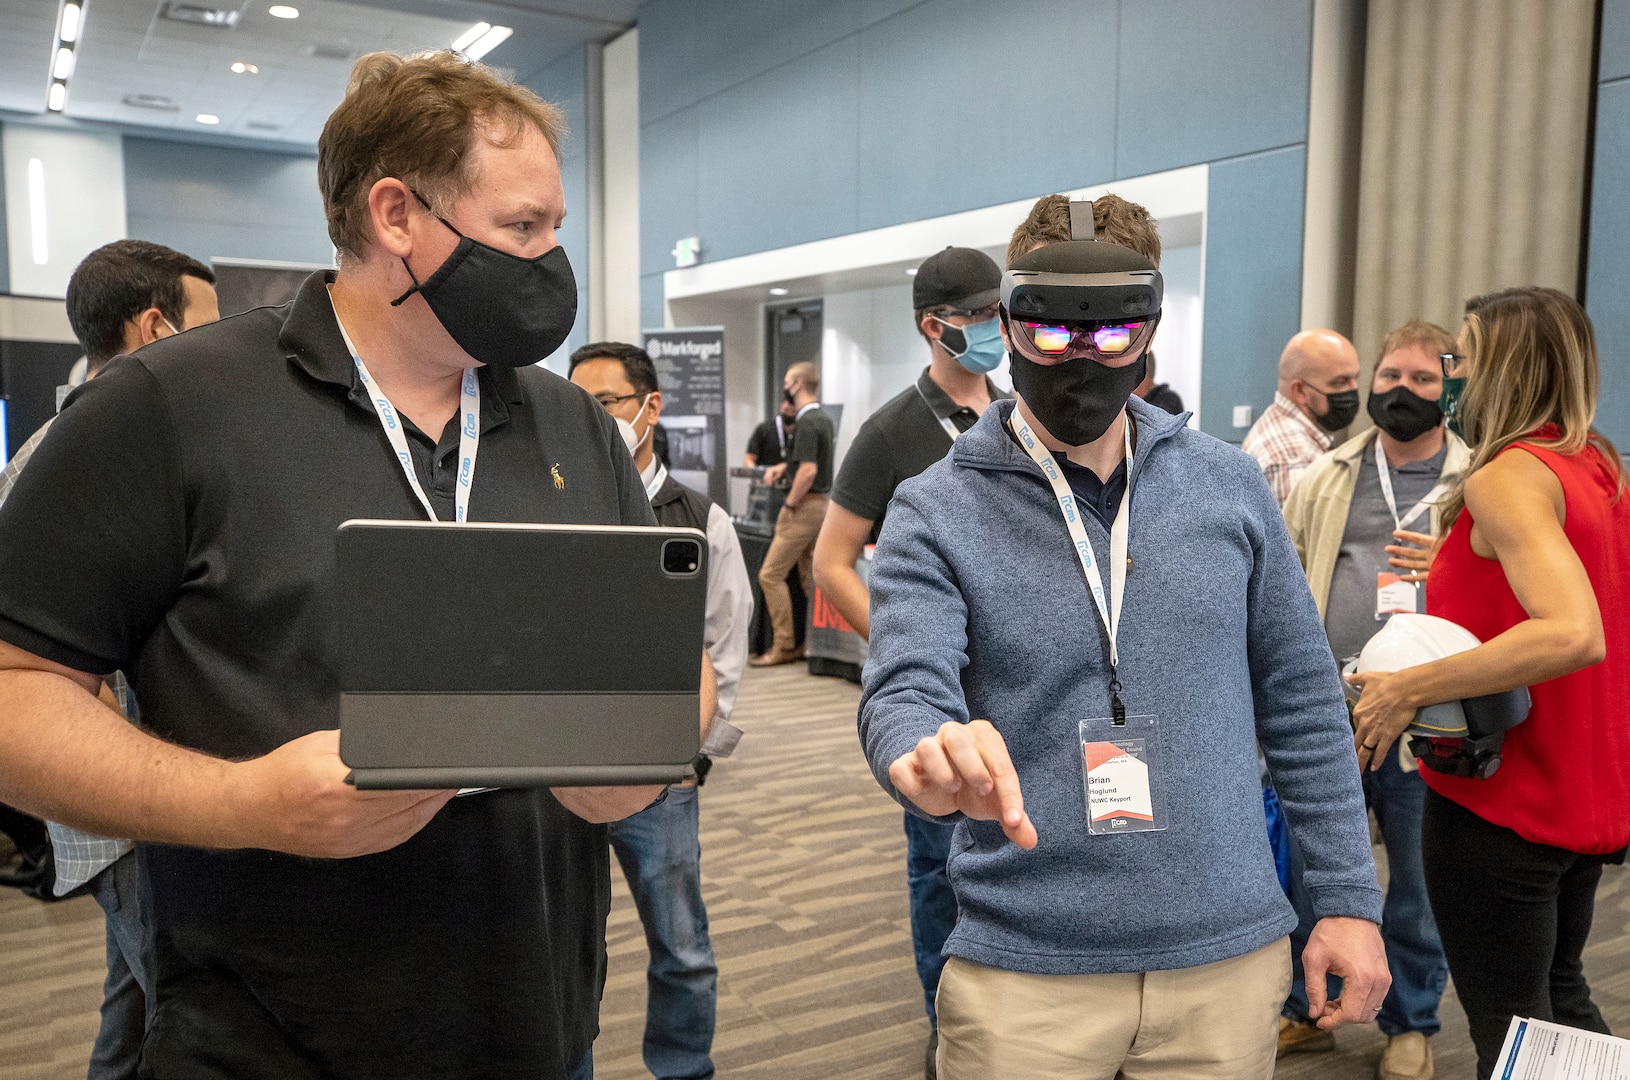 Lifecycle Engineering representative Cory Kozlowski, left, helps Brian Hoglund, a Keyport computer scientist, use a mixed-reality headset Wednesday, Aug. 25, 2021, during Puget Sound Naval Shipyard & Intermediate Maintenance Facility's 2021 Technology Showcase at the Kitsap Conference Center in Bremerton, Washington. (PSNS & IMF photo by Scott Hansen)